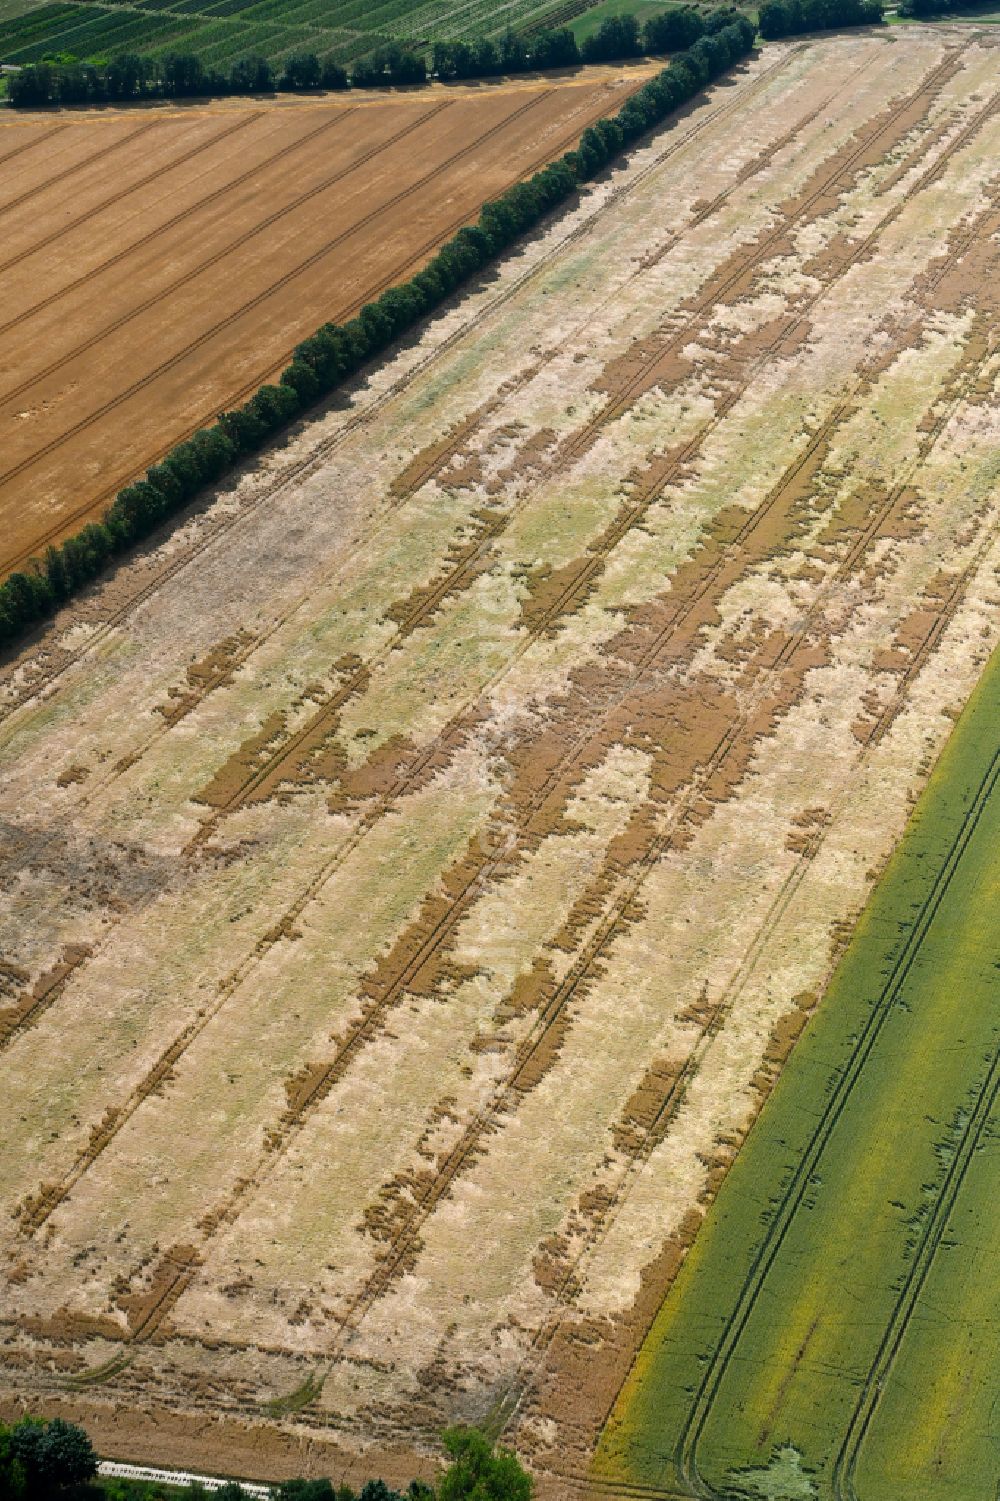 Aerial photograph Wachow - Young green-colored grain field structures and rows in a field in Wachow in the state Brandenburg, Germany